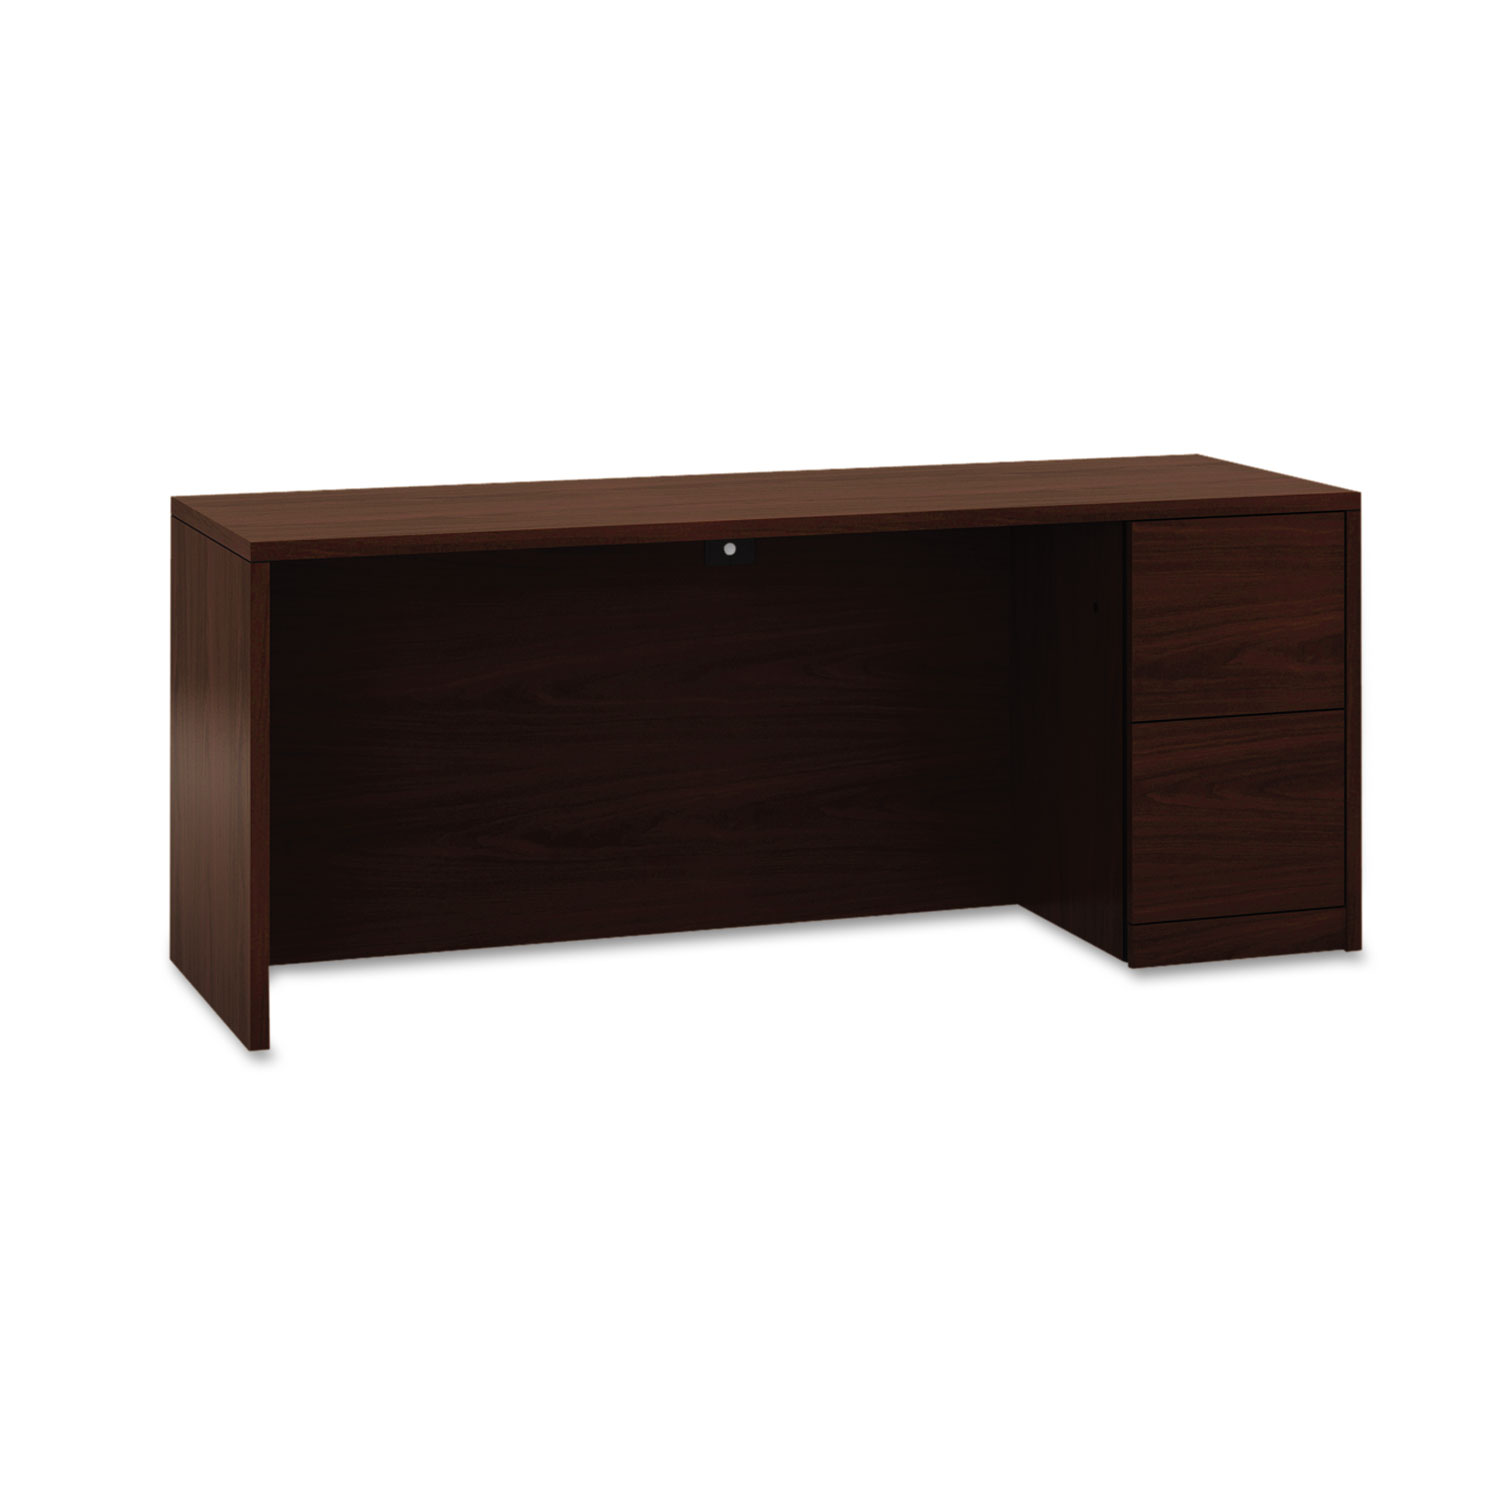 10500 Series Full-Height Right Pedestal Credenza, 72w x 24d x 29-1/2h, Mahogany